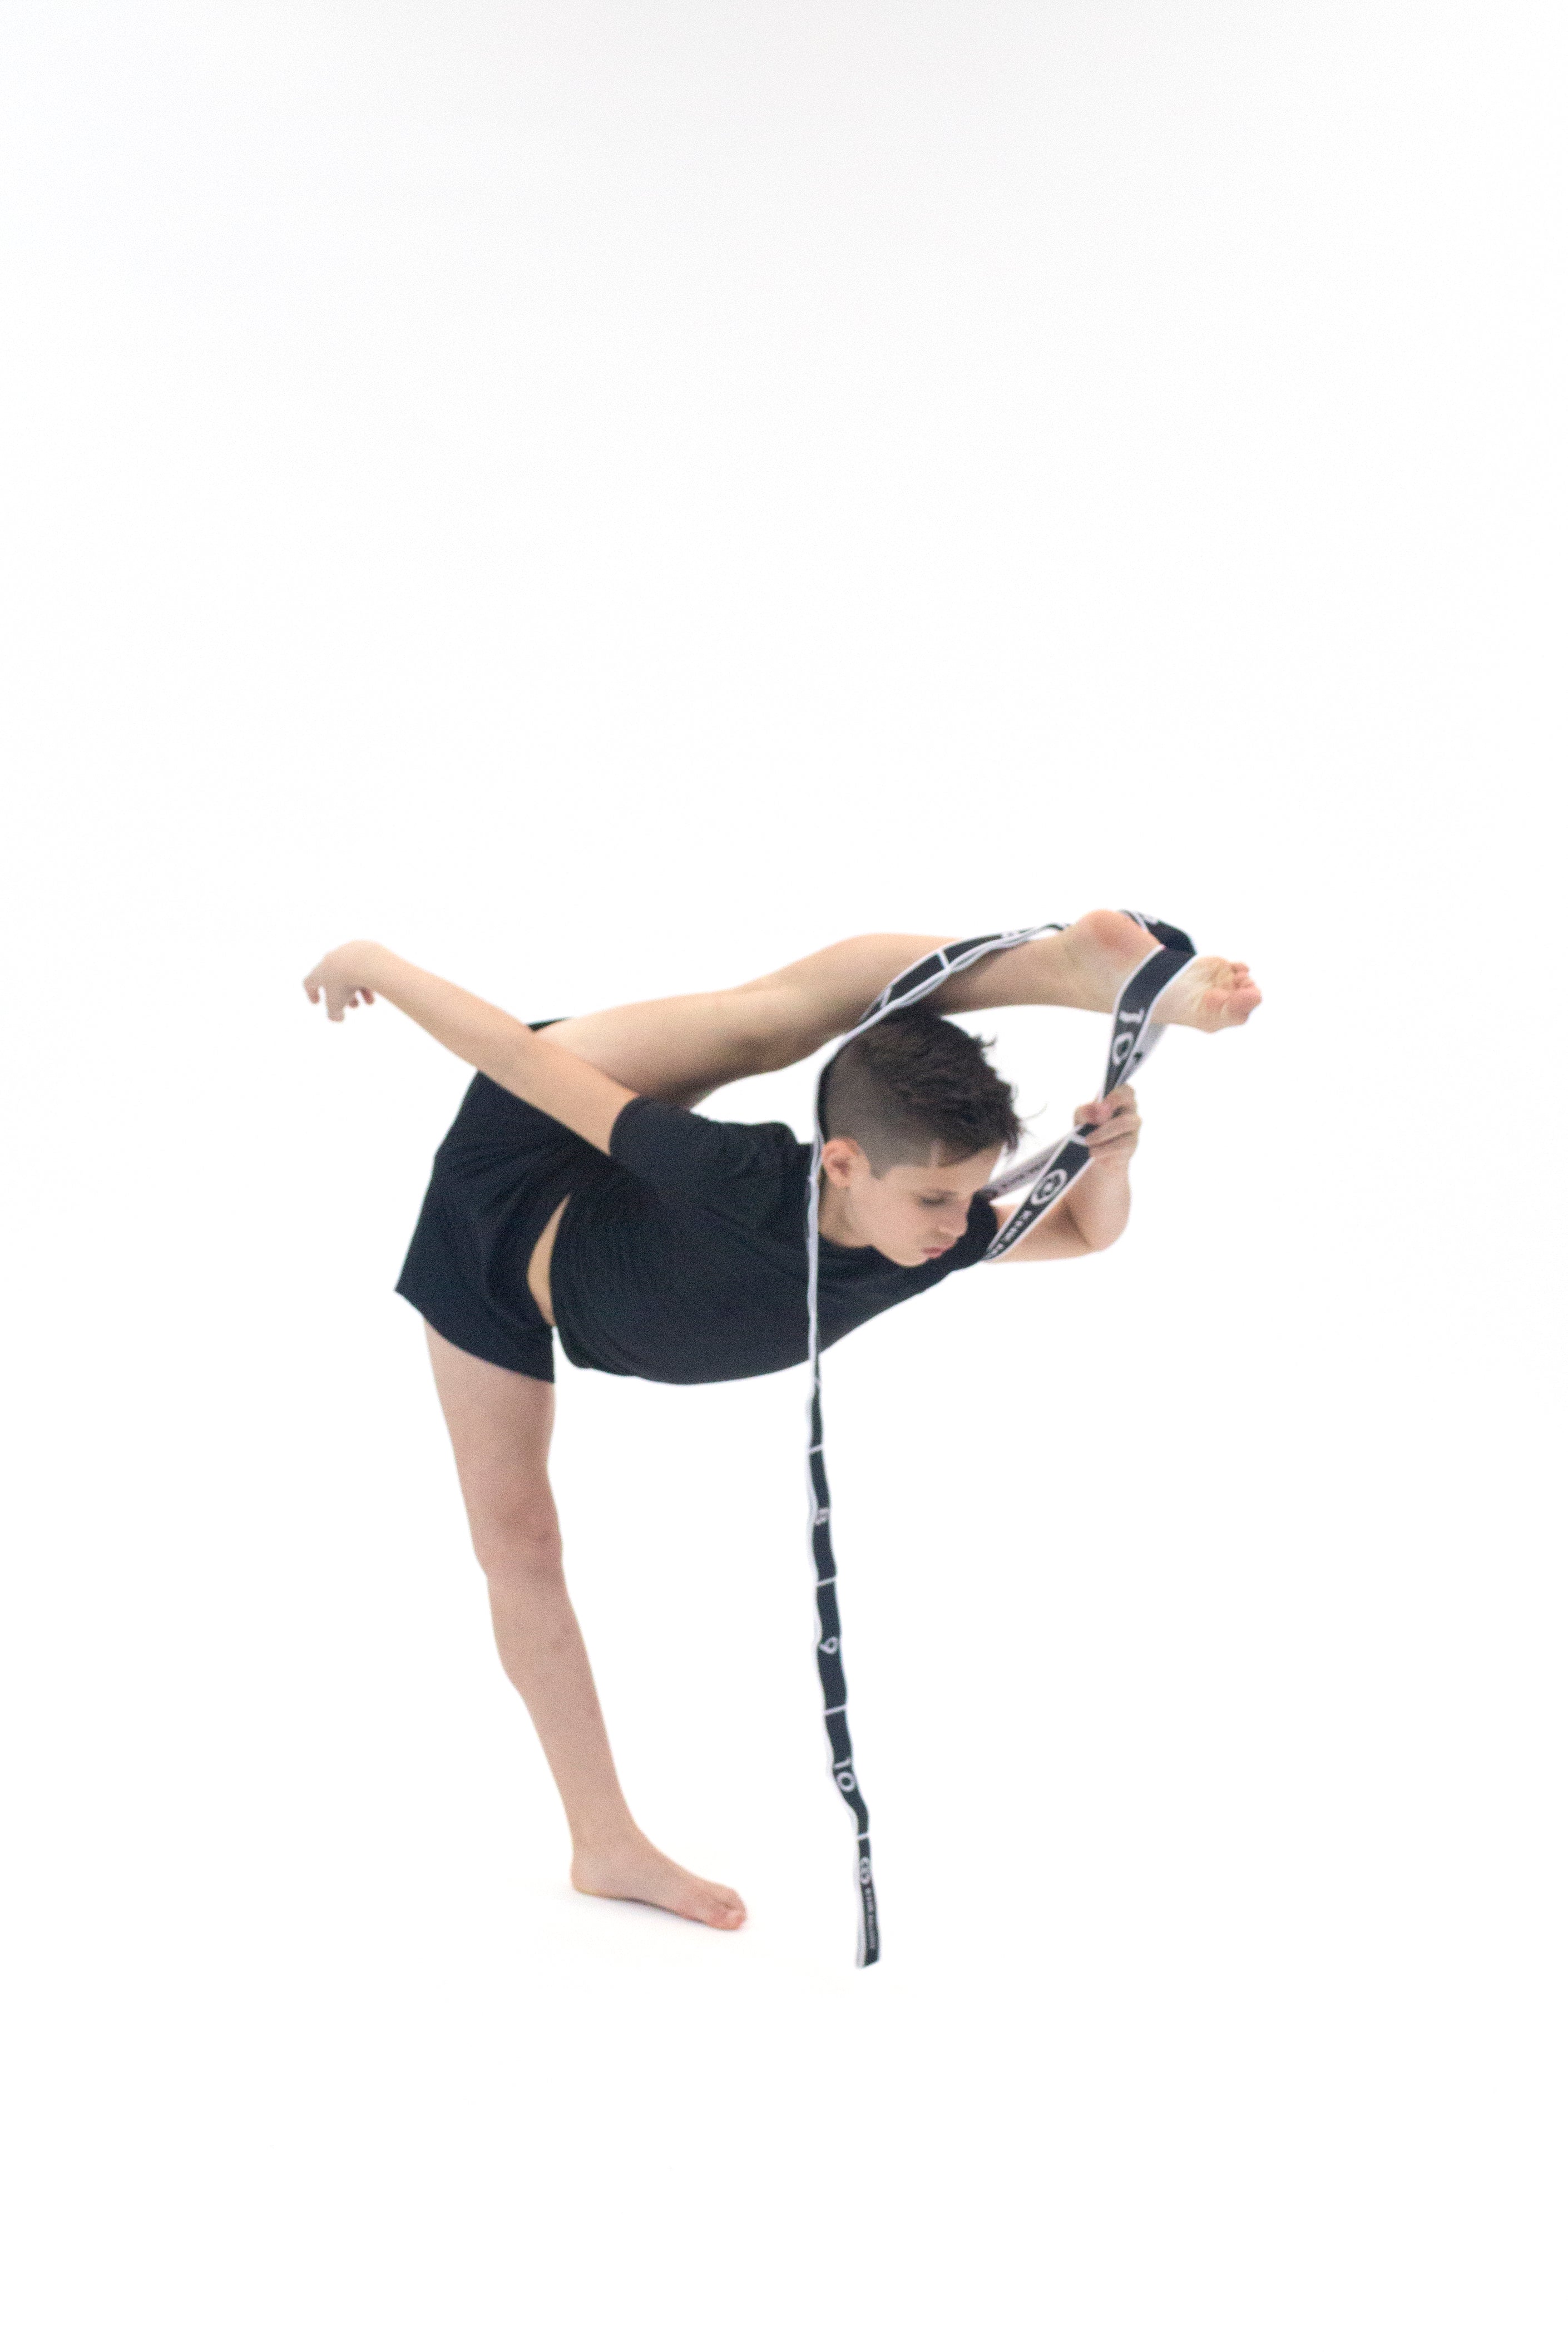 KNKMiami Stretch Band Premium 12 Loops - Light Resistance -